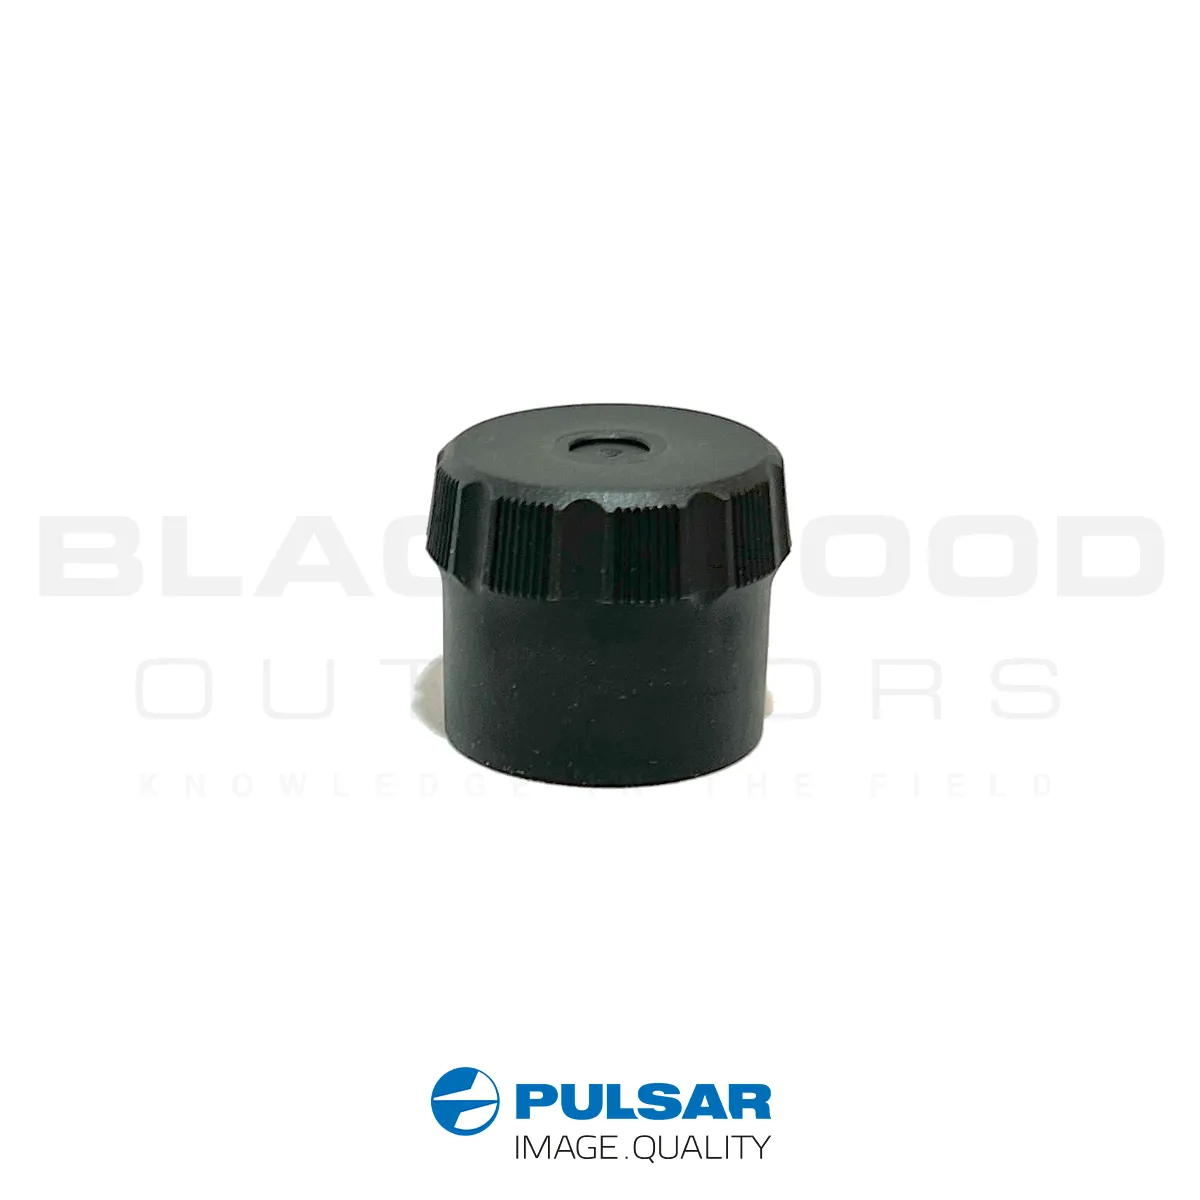 Pulsar Thermion and Digex short APS2 replacement battery turret cap